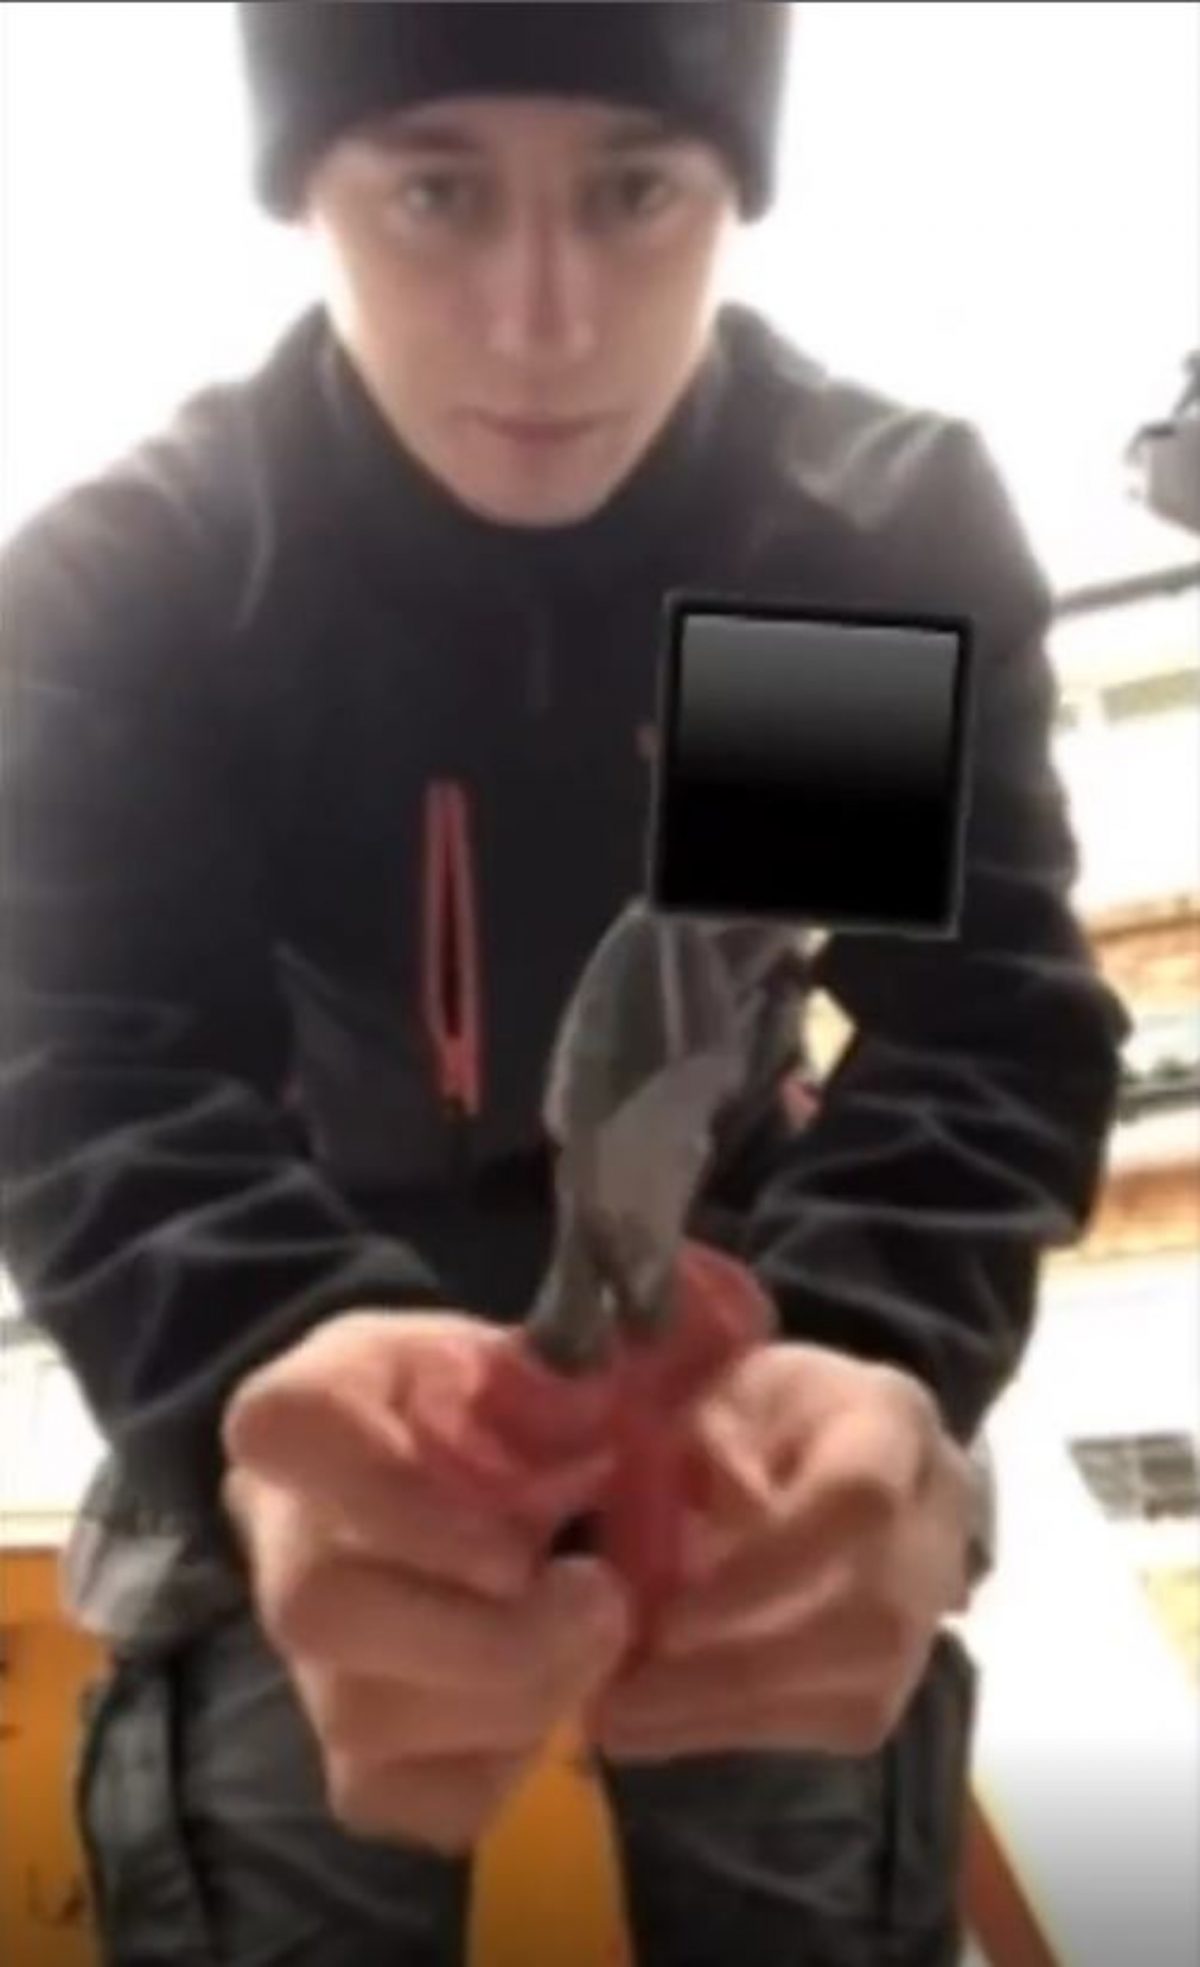 Kyle shows the pliers